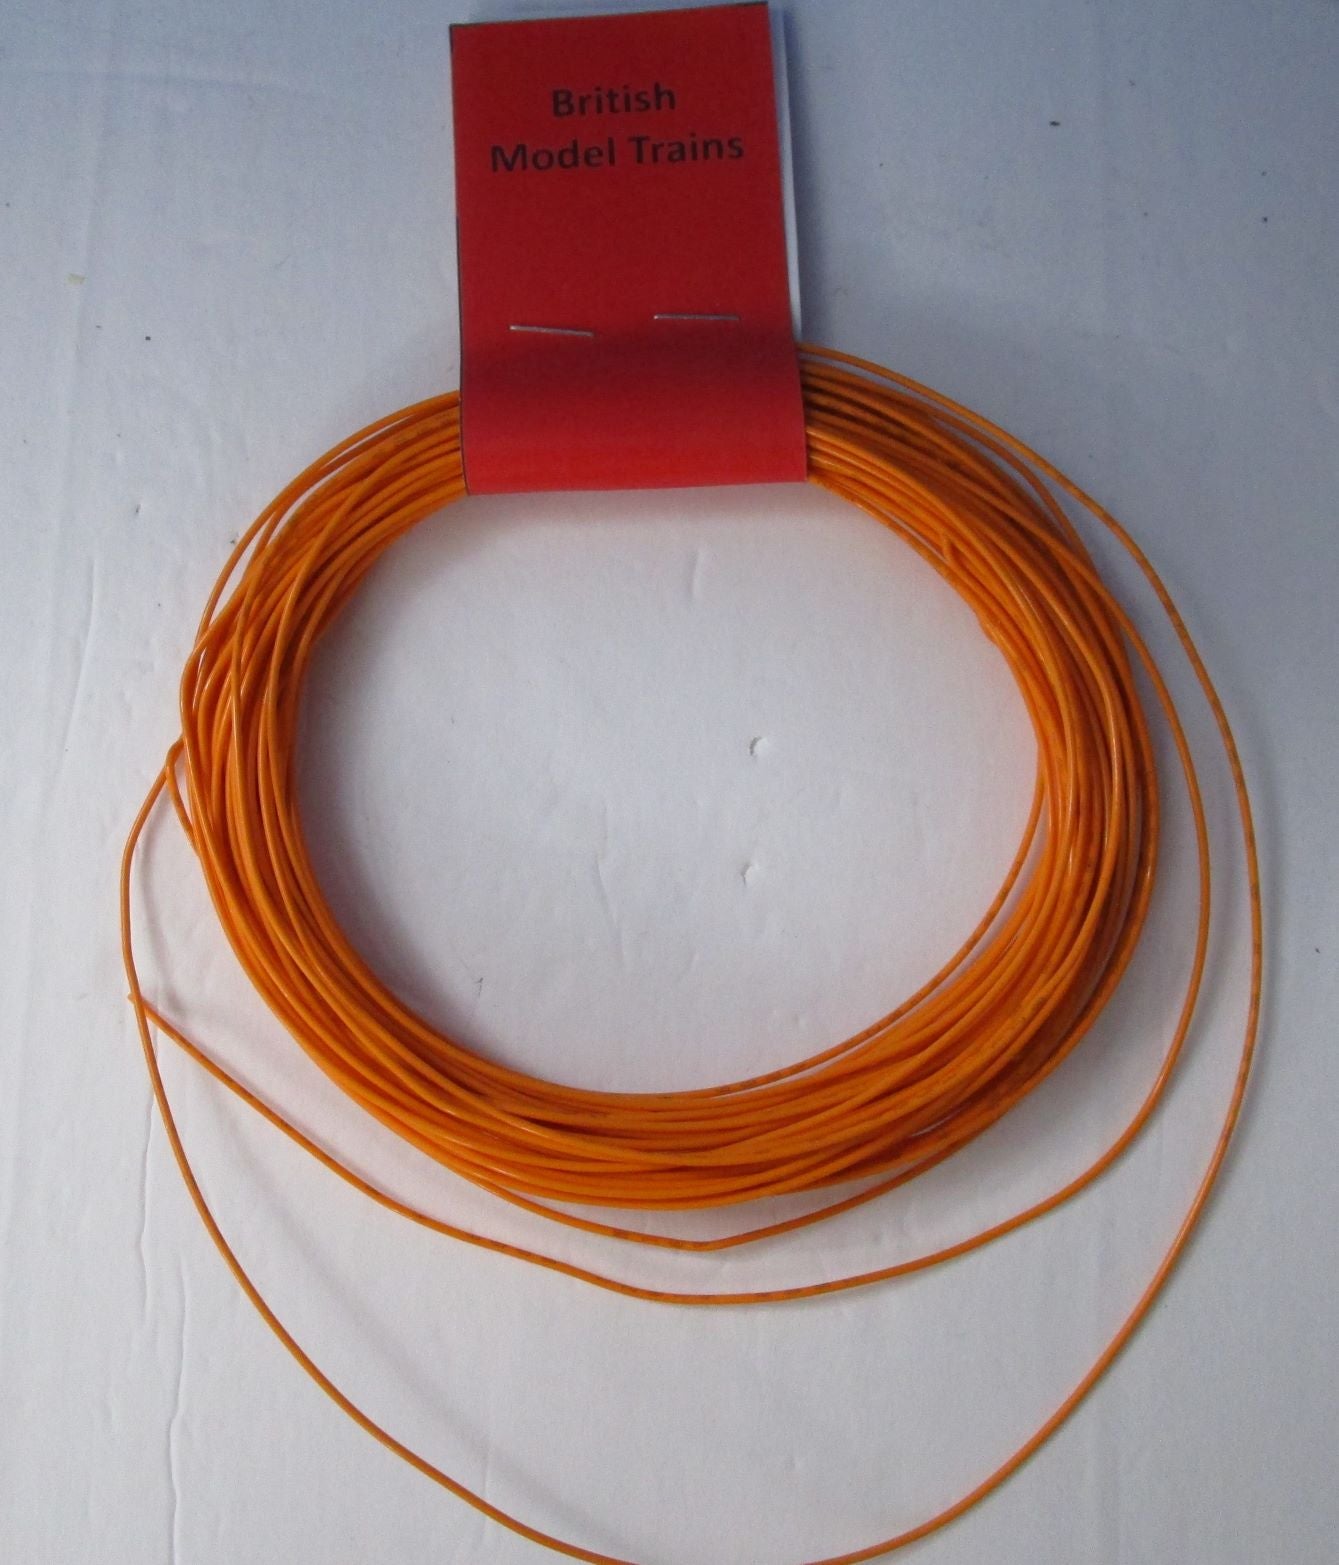 BMT041 Orange wire, 25 feet, 22 AWG, silver plated copper wire with PTFE insulation